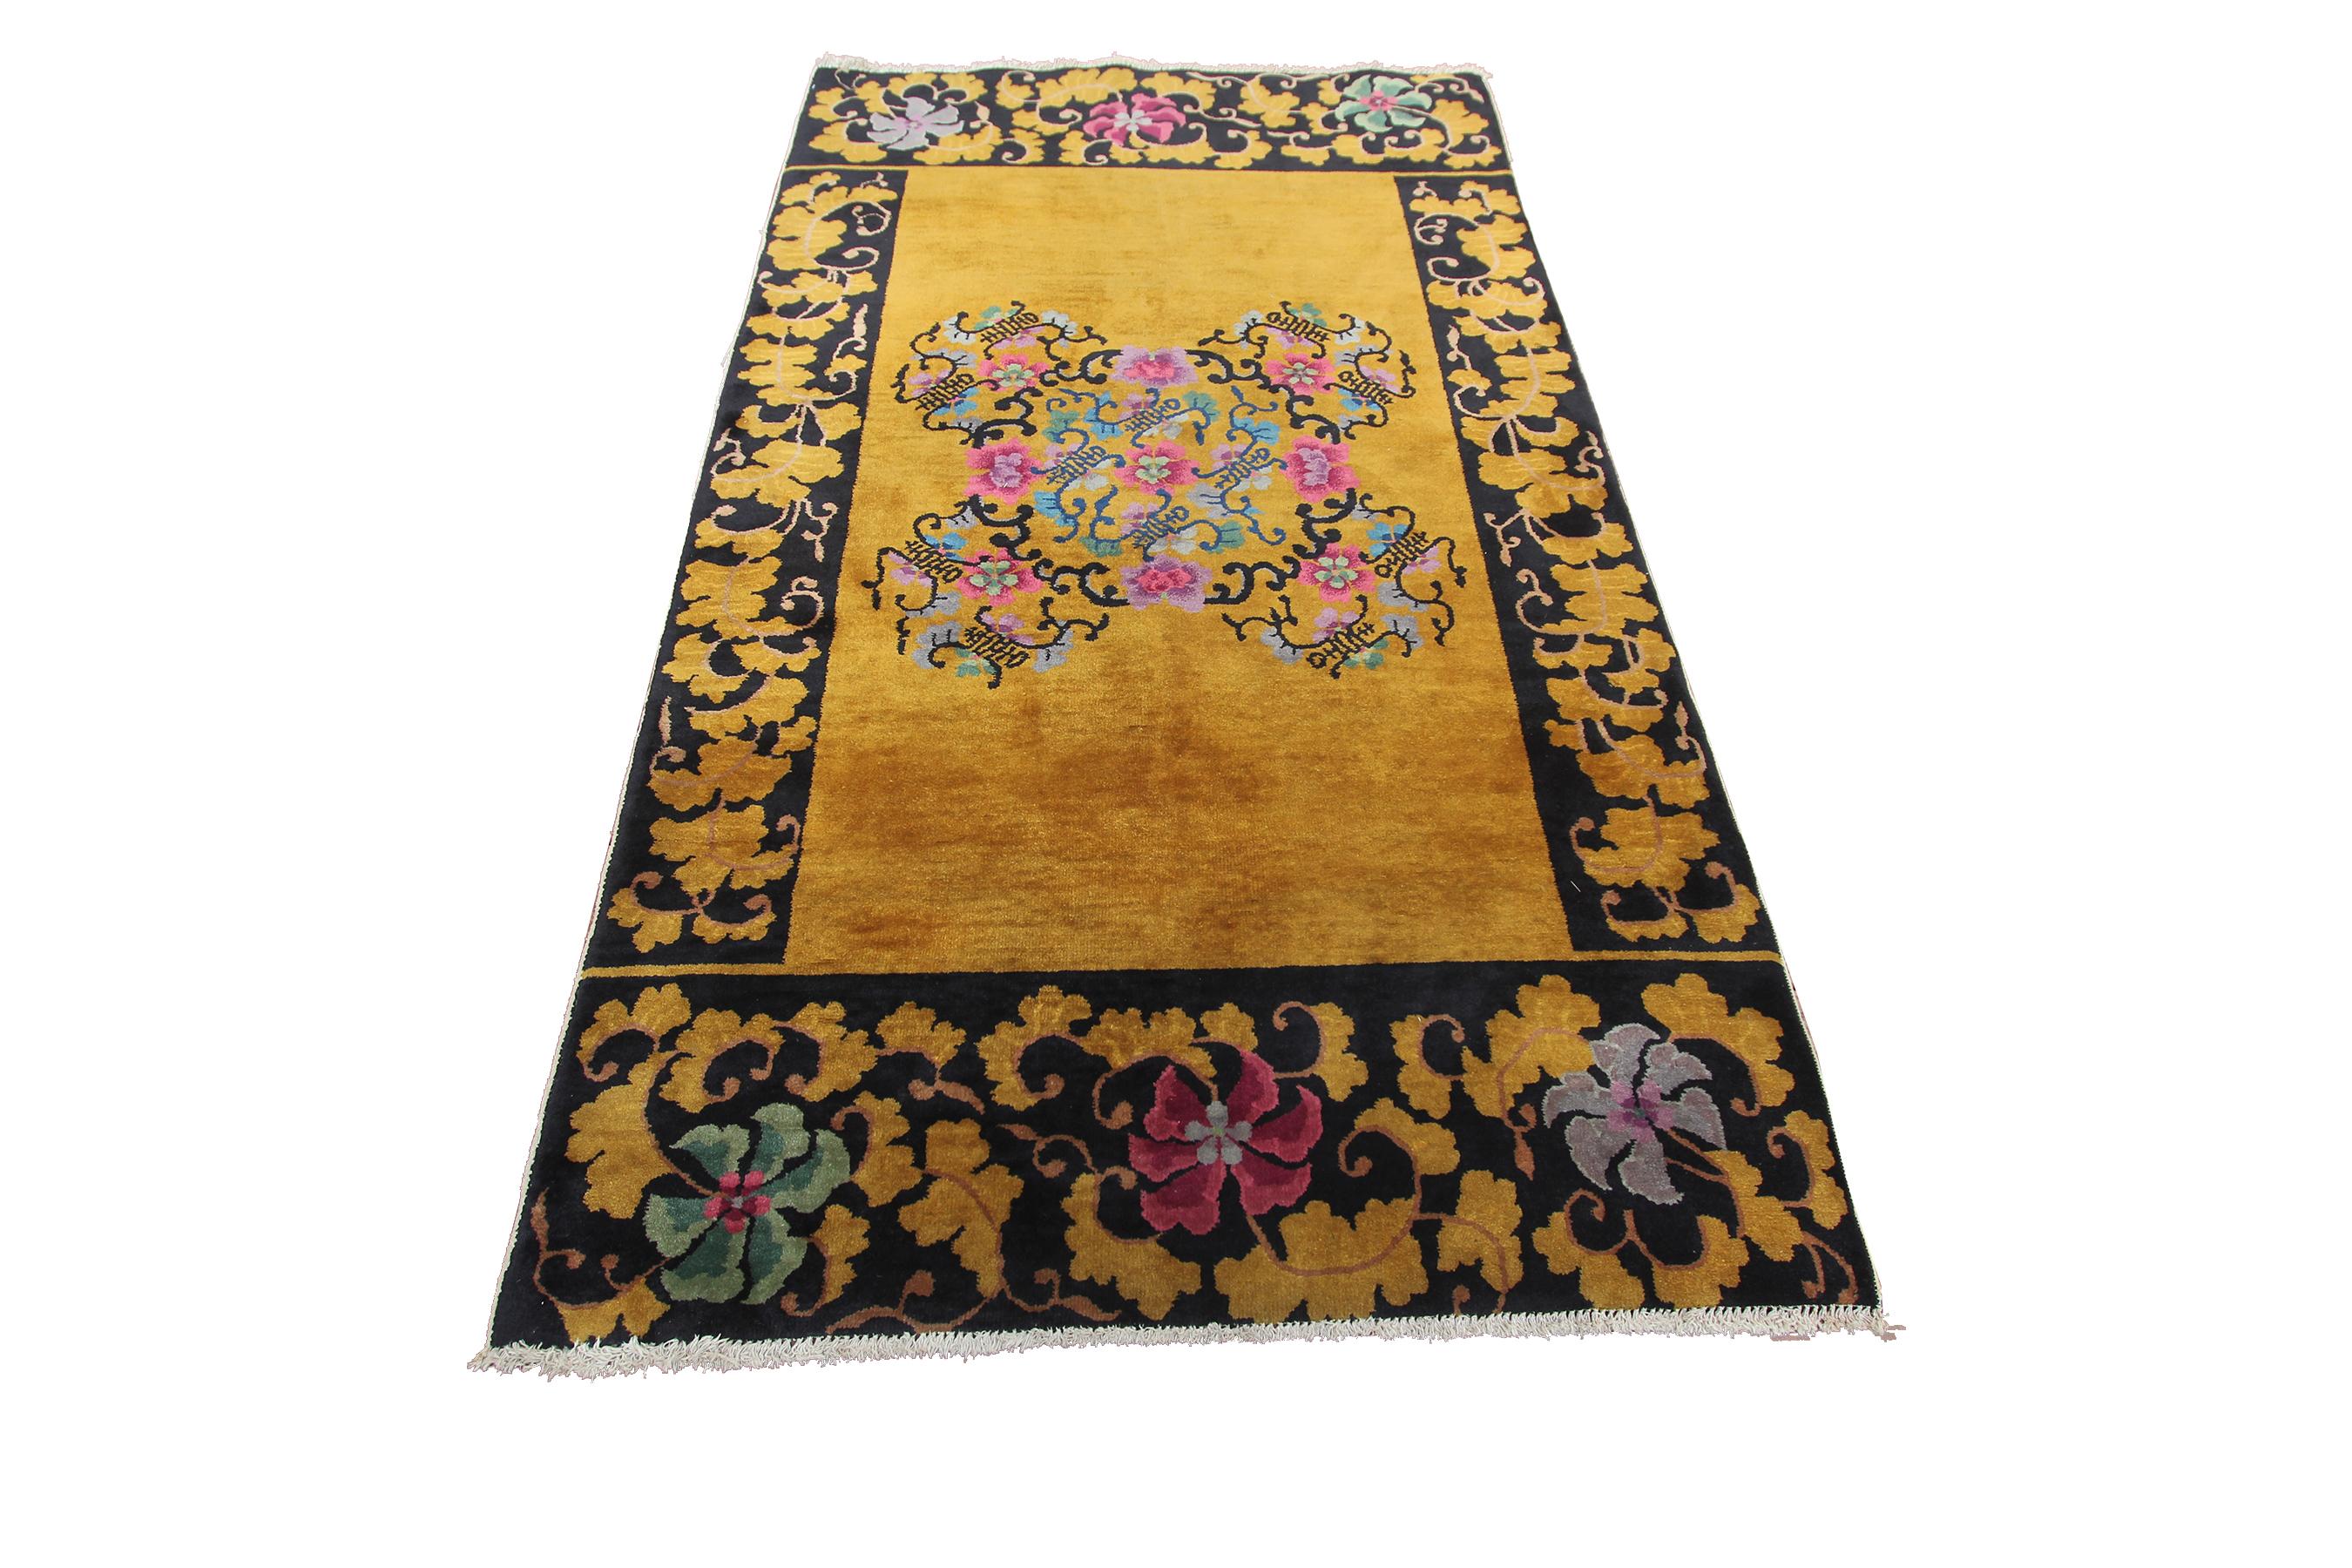 Hand-Knotted Gold Antique Art Deco Rug Antique Chinese Rug Walter Nichols Black 4x7 122x203cm For Sale